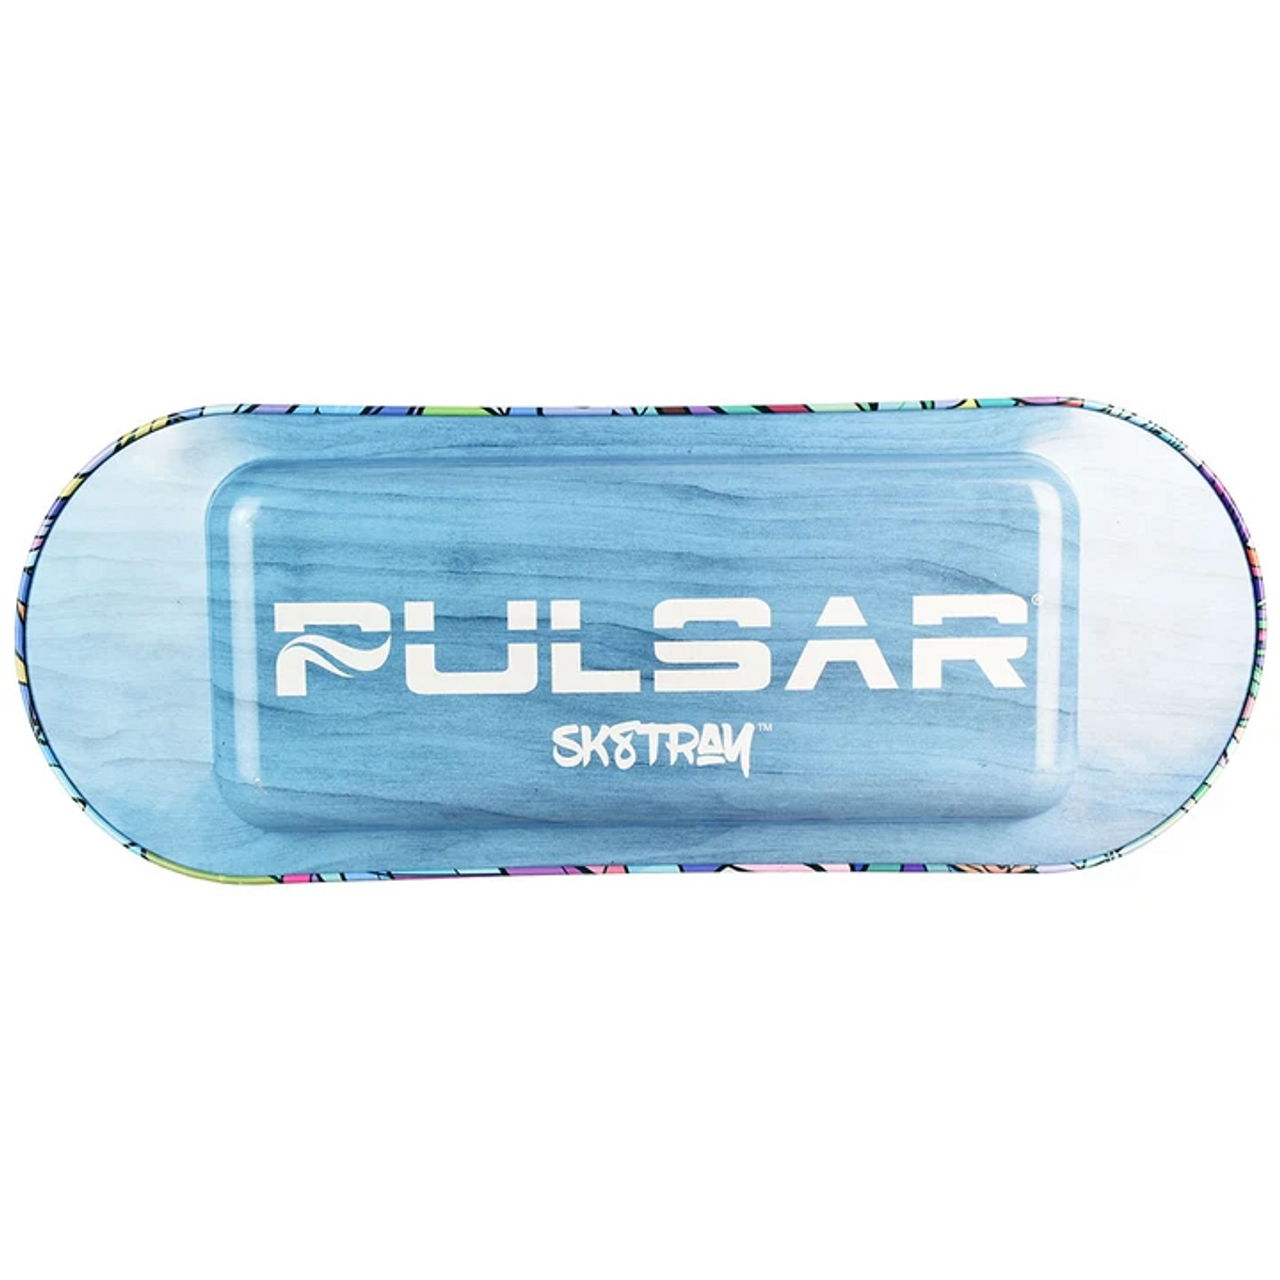 Pulsar SK8Tray Rolling Tray with Lid